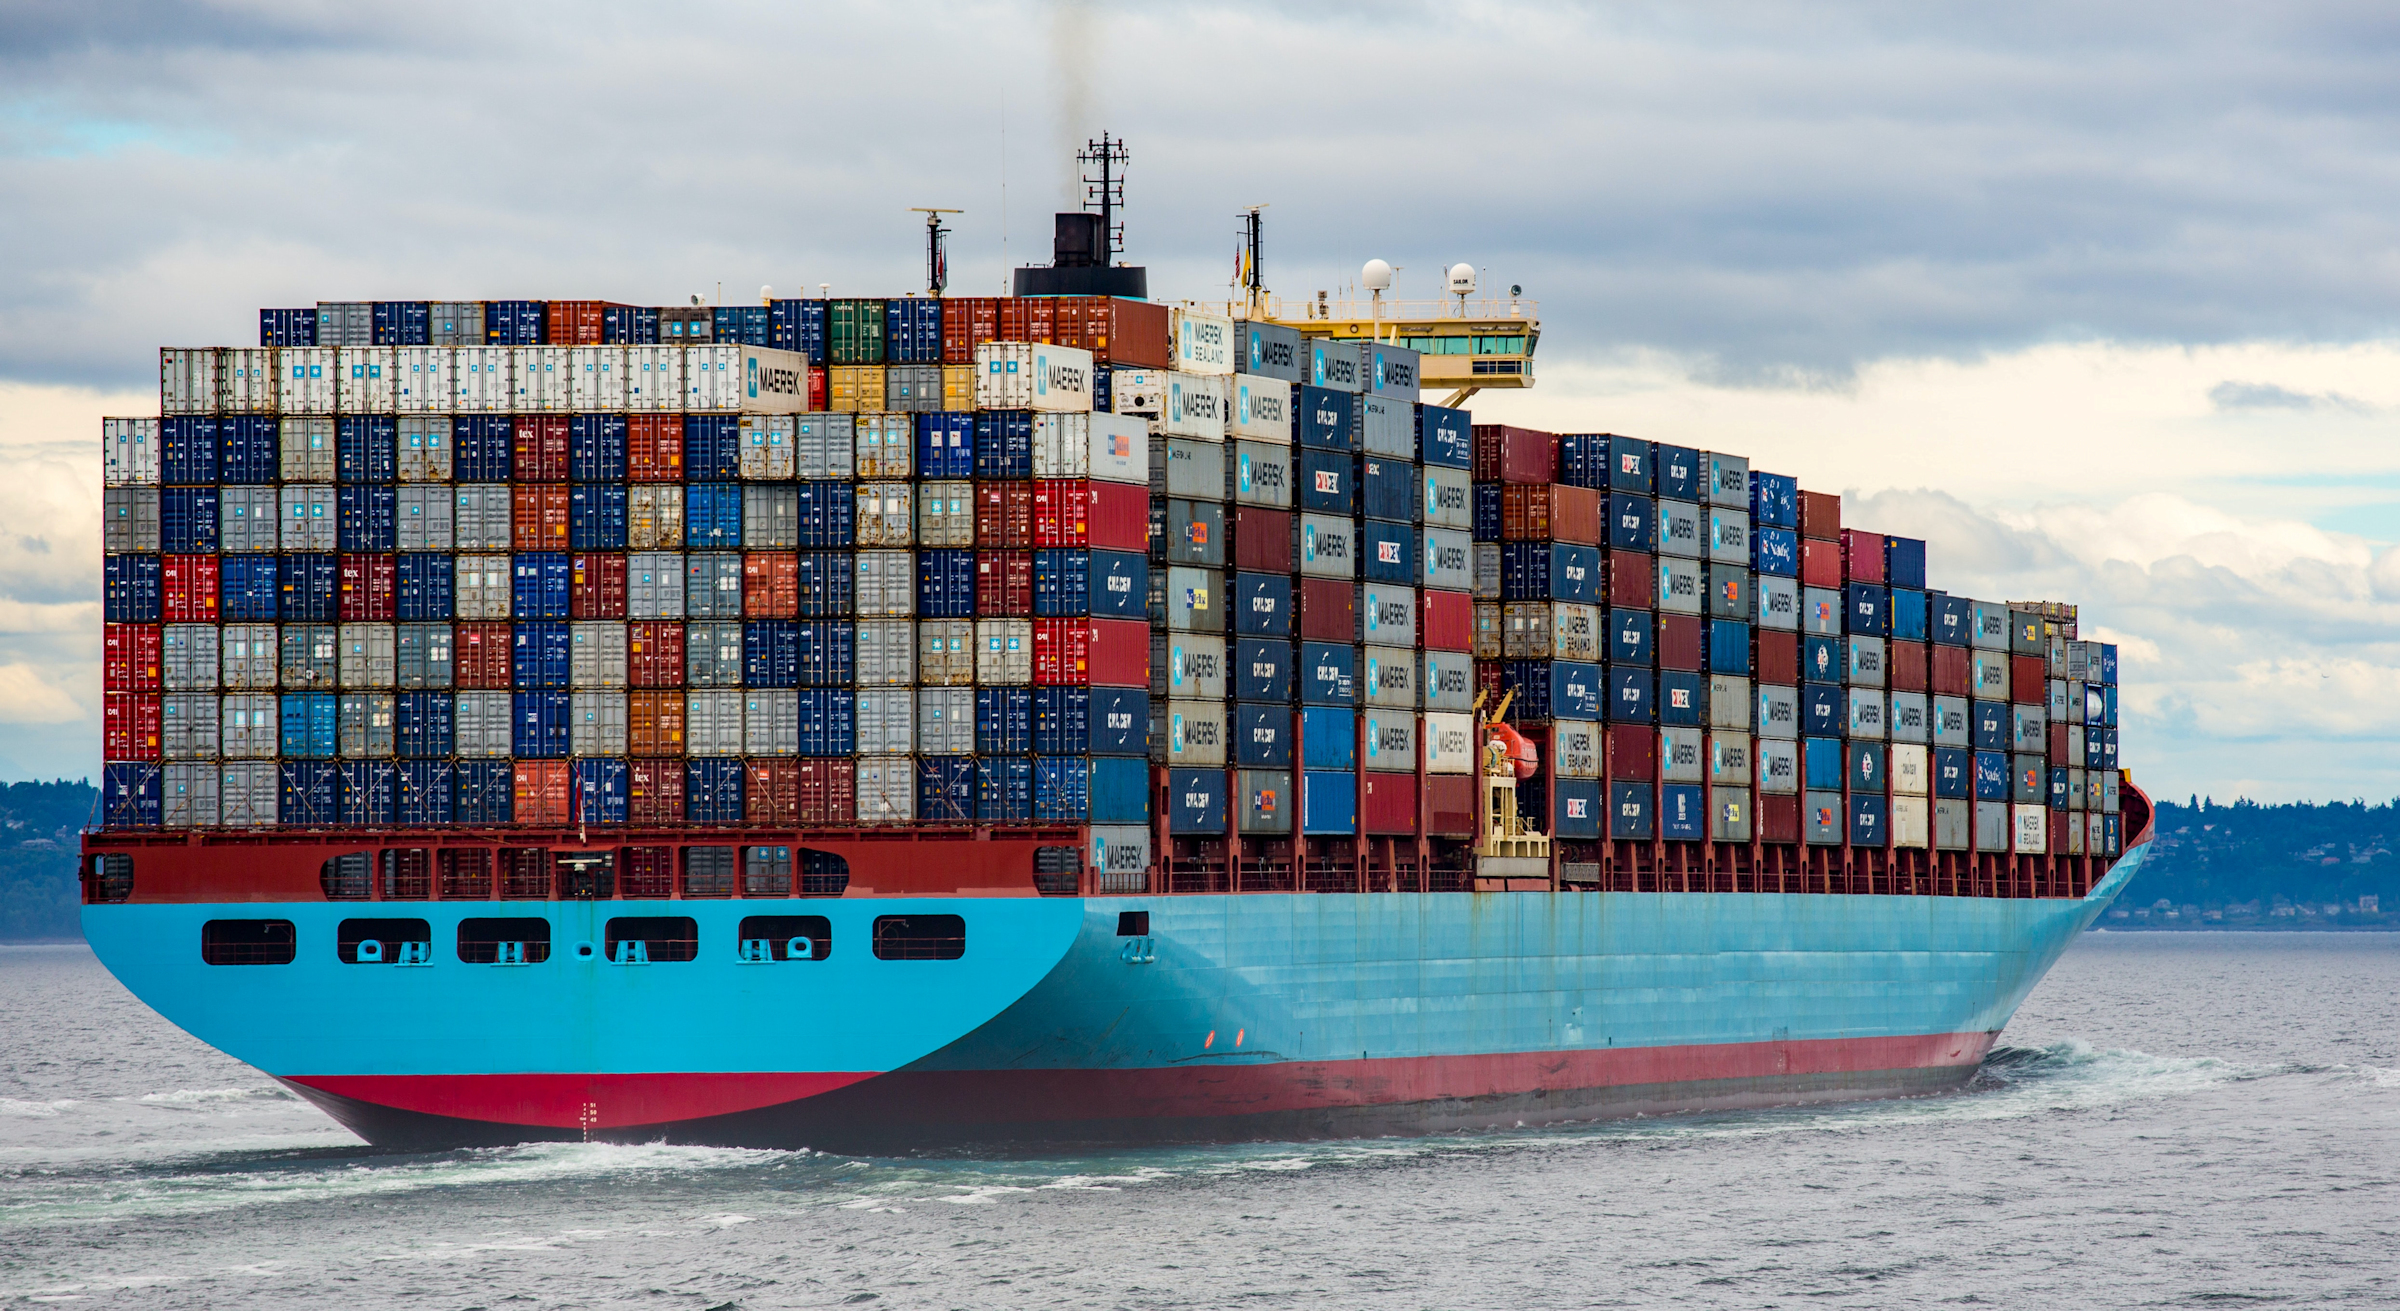 A container ship loaded high with containers.